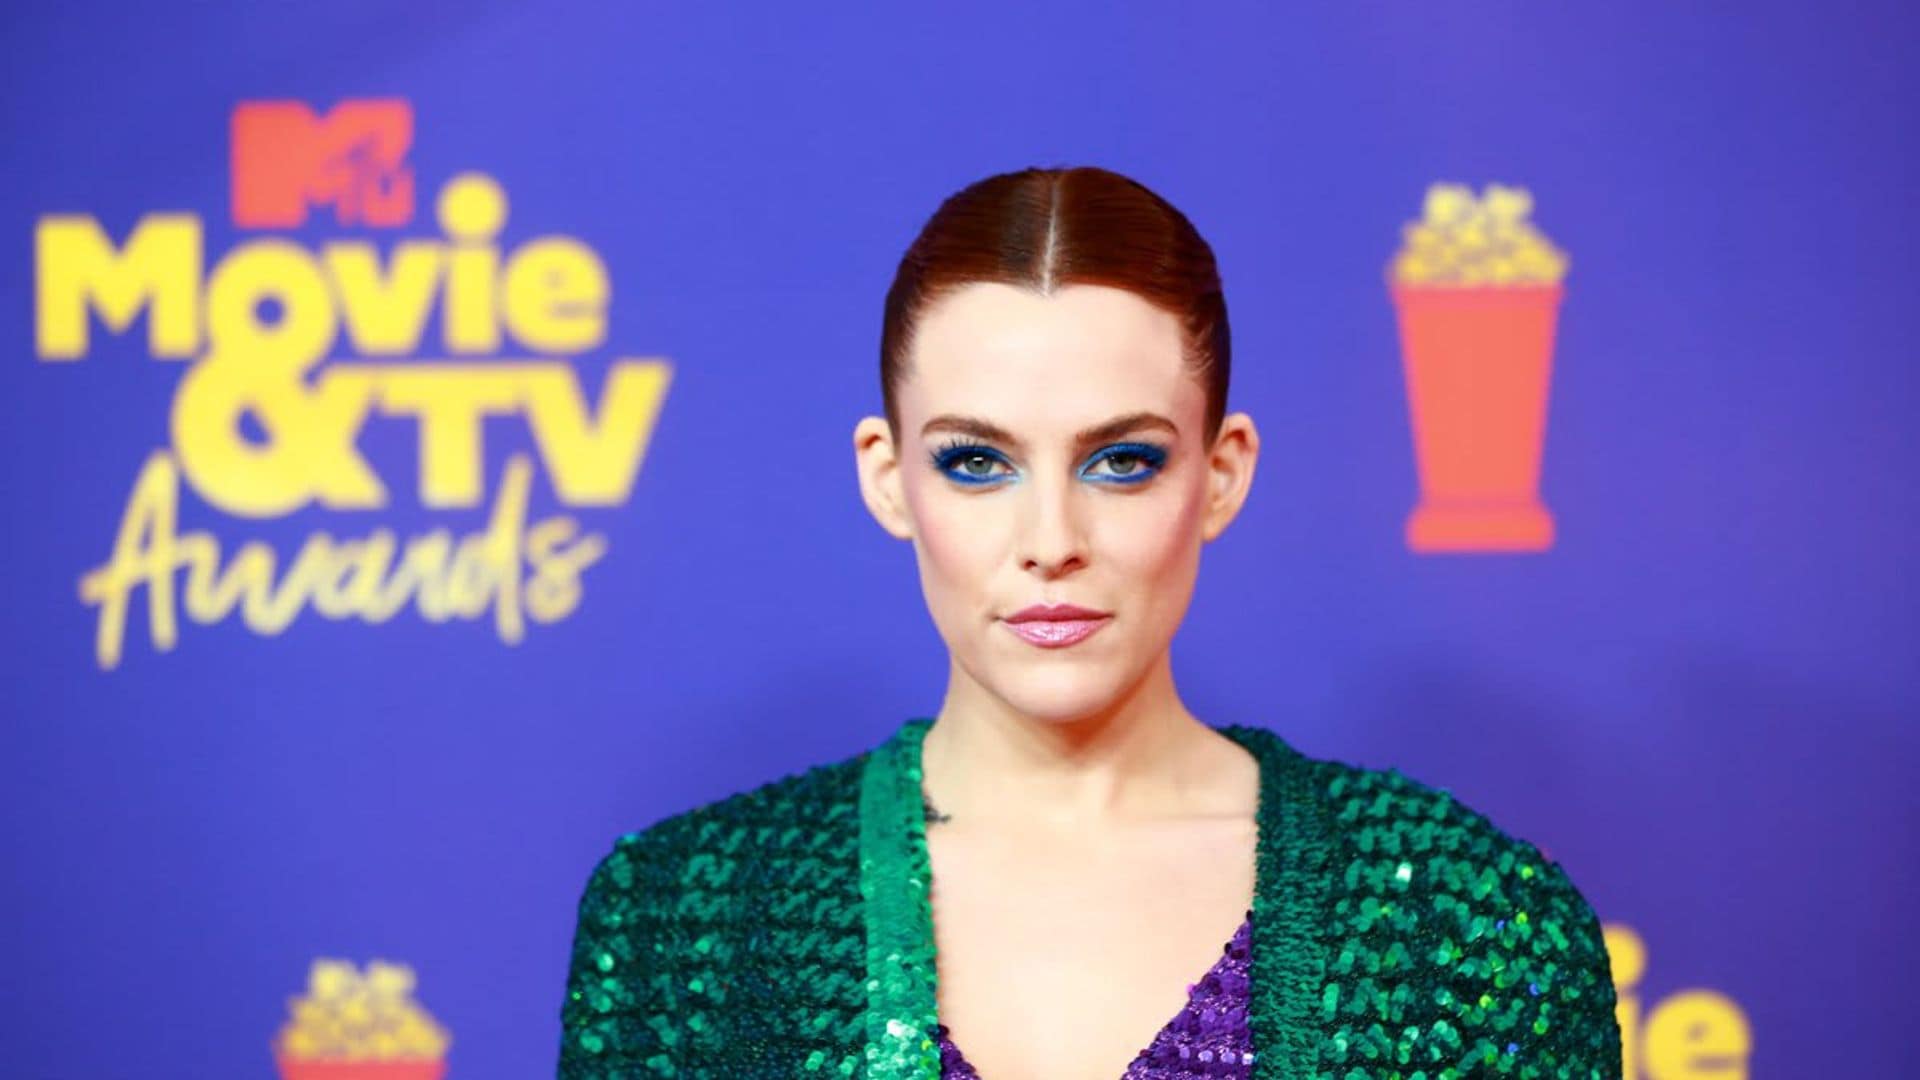 Riley Keough, daughter of Lisa Marie Presley, posed in a plunging gown in her bathroom